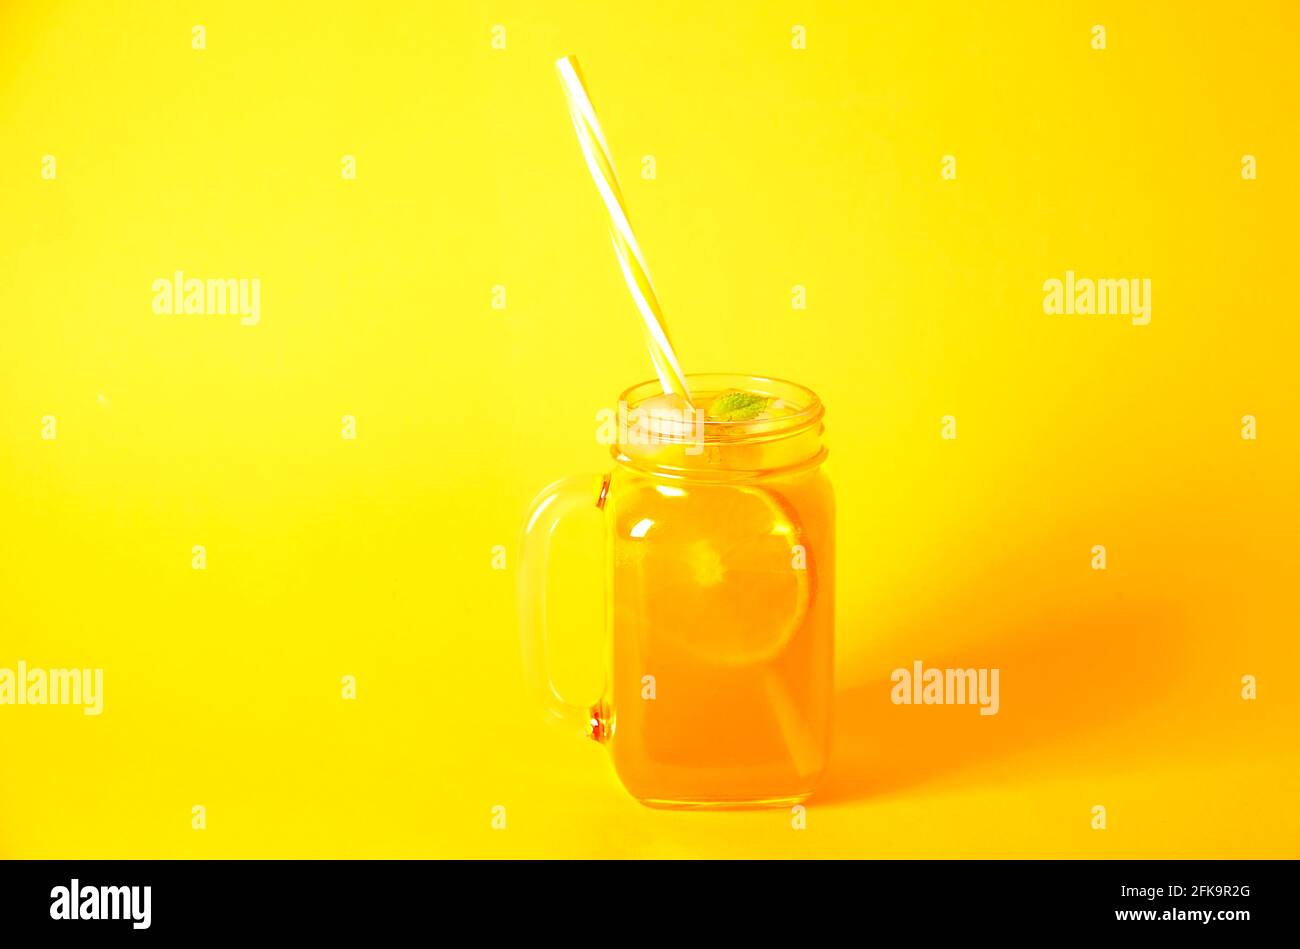 https://c8.alamy.com/comp/2FK9R2G/colorful-composition-with-vintage-mason-jar-glass-full-of-fresh-orange-juice-based-non-alcoholic-summer-cocktail-with-ice-straw-fruit-isolated-on-y-2FK9R2G.jpg